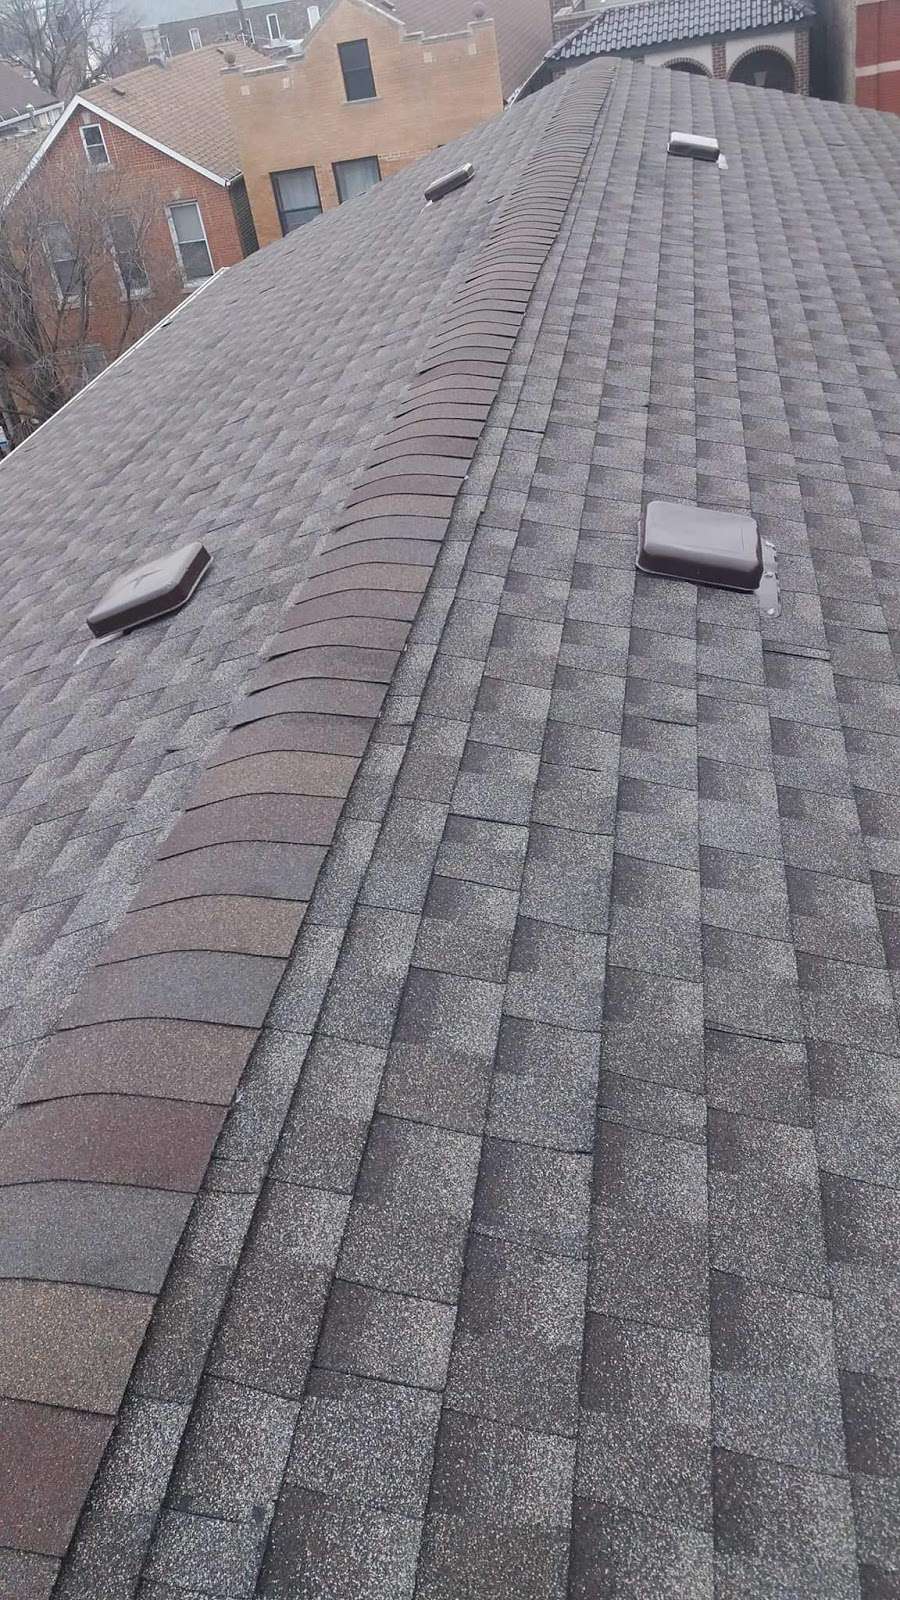 Amaros roofing services | 3802 W 68th Pl, Chicago, IL 60629 | Phone: (708) 516-9180